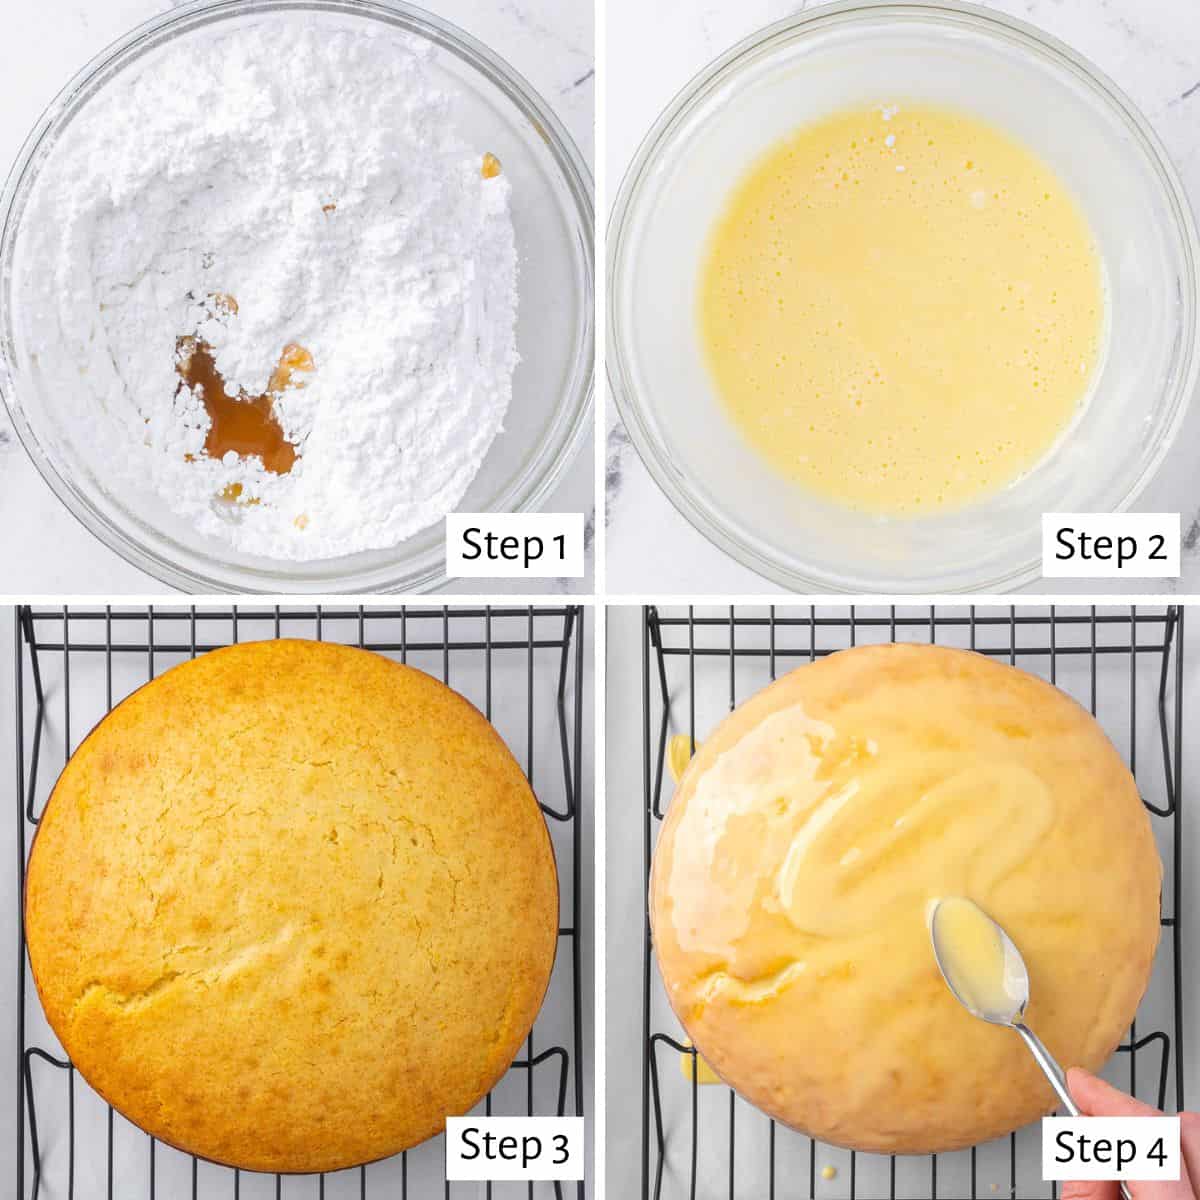 4-image collage making glaze: 1 - Orange juice, powdered sugar, and vanilla in a bowl before whisking; 2 - After whisking; 3 - Baked cake on a wire rack; 4 - Spreading glaze onto cake.